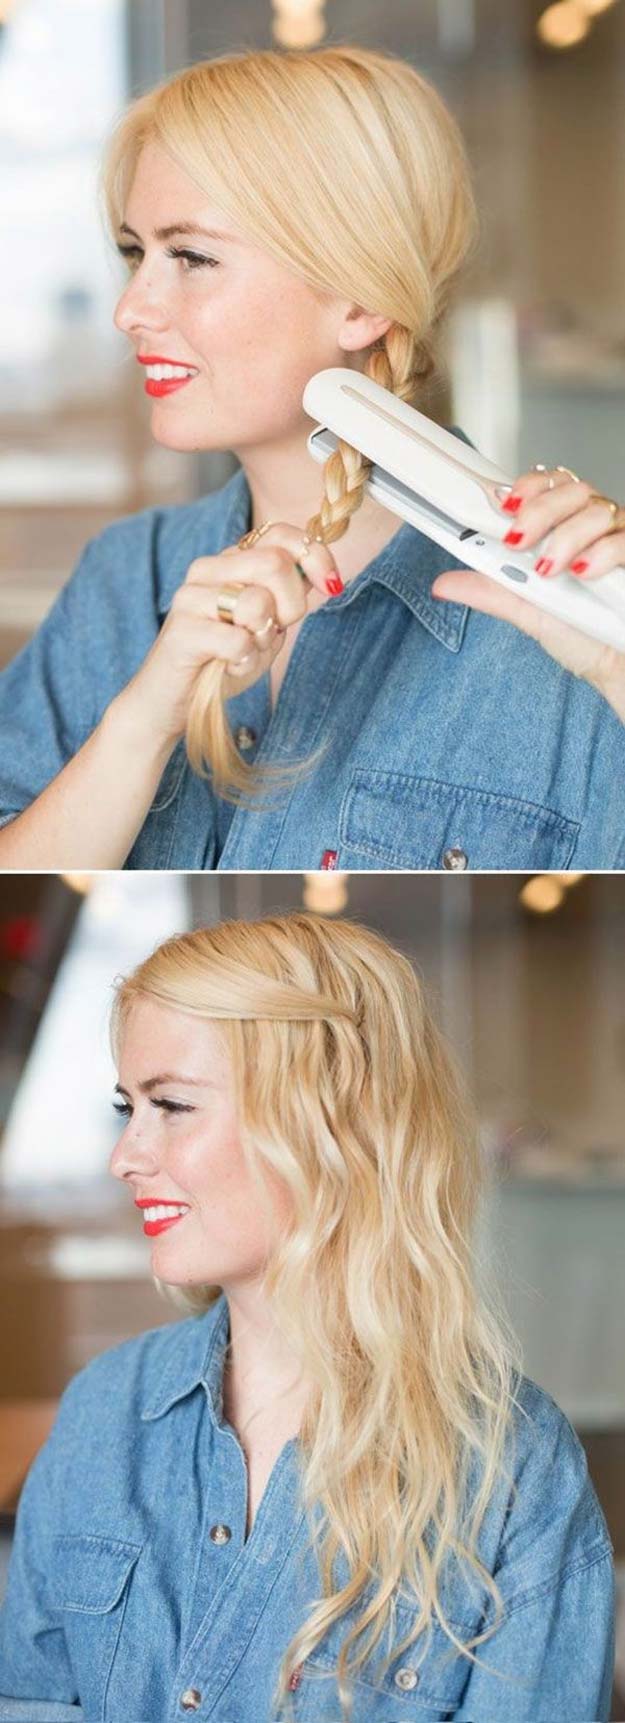 Cool and Easy DIY Hairstyles - 5 Minute Office Friendly Hairstyle - Quick and Easy Ideas for Back to School Styles for Medium, Short and Long Hair - Fun Tips and Best Step by Step Tutorials for Teens, Prom, Weddings, Special Occasions and Work. Up dos, Braids, Top Knots and Buns, Super Summer Looks http://diyprojectsforteens.com/diy-cool-easy-hairstyles